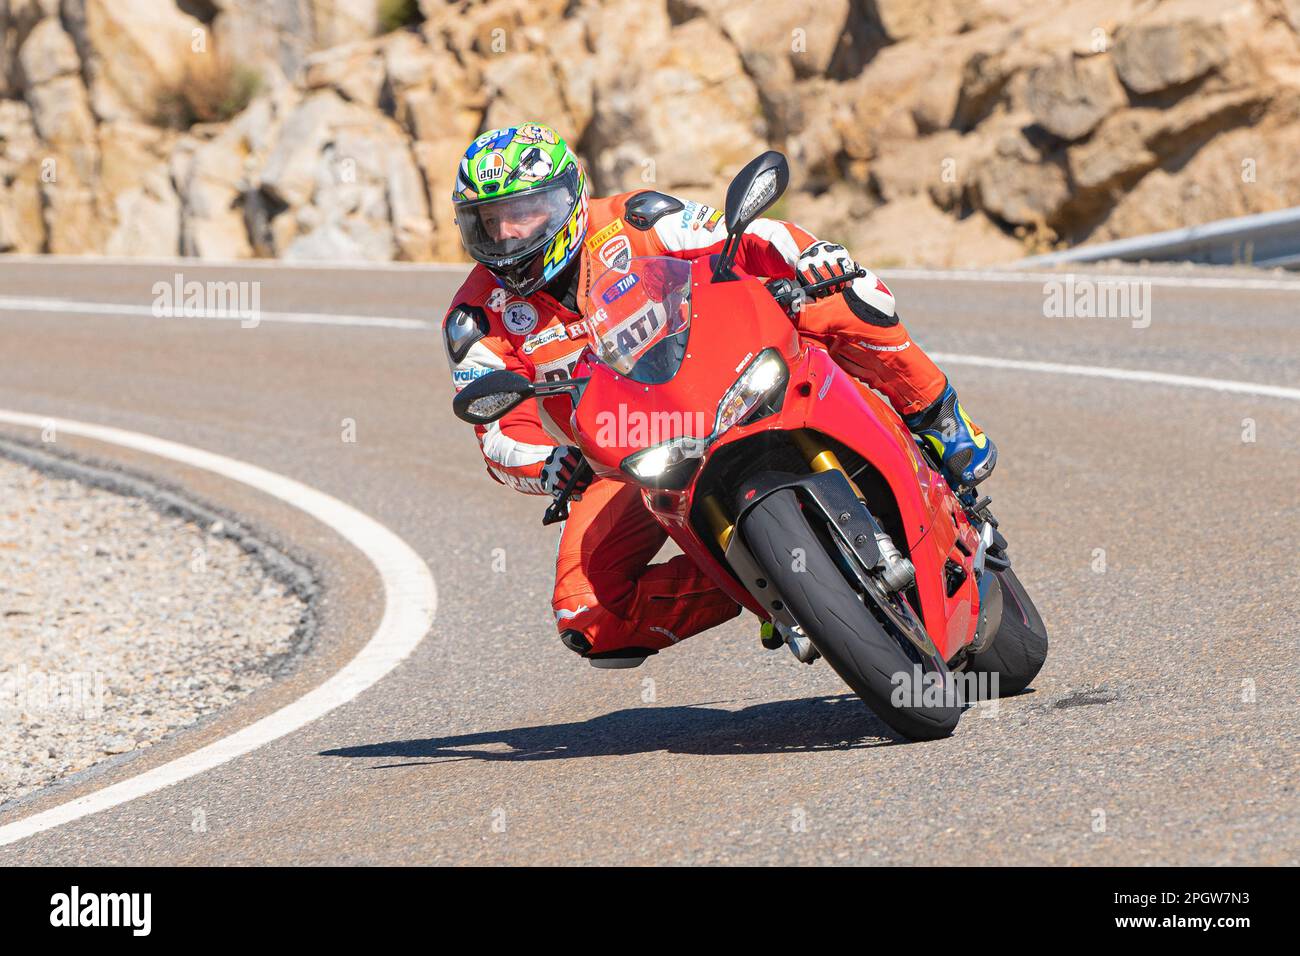 Rider on the asphalt with his bike leaning around a curve Stock Photo